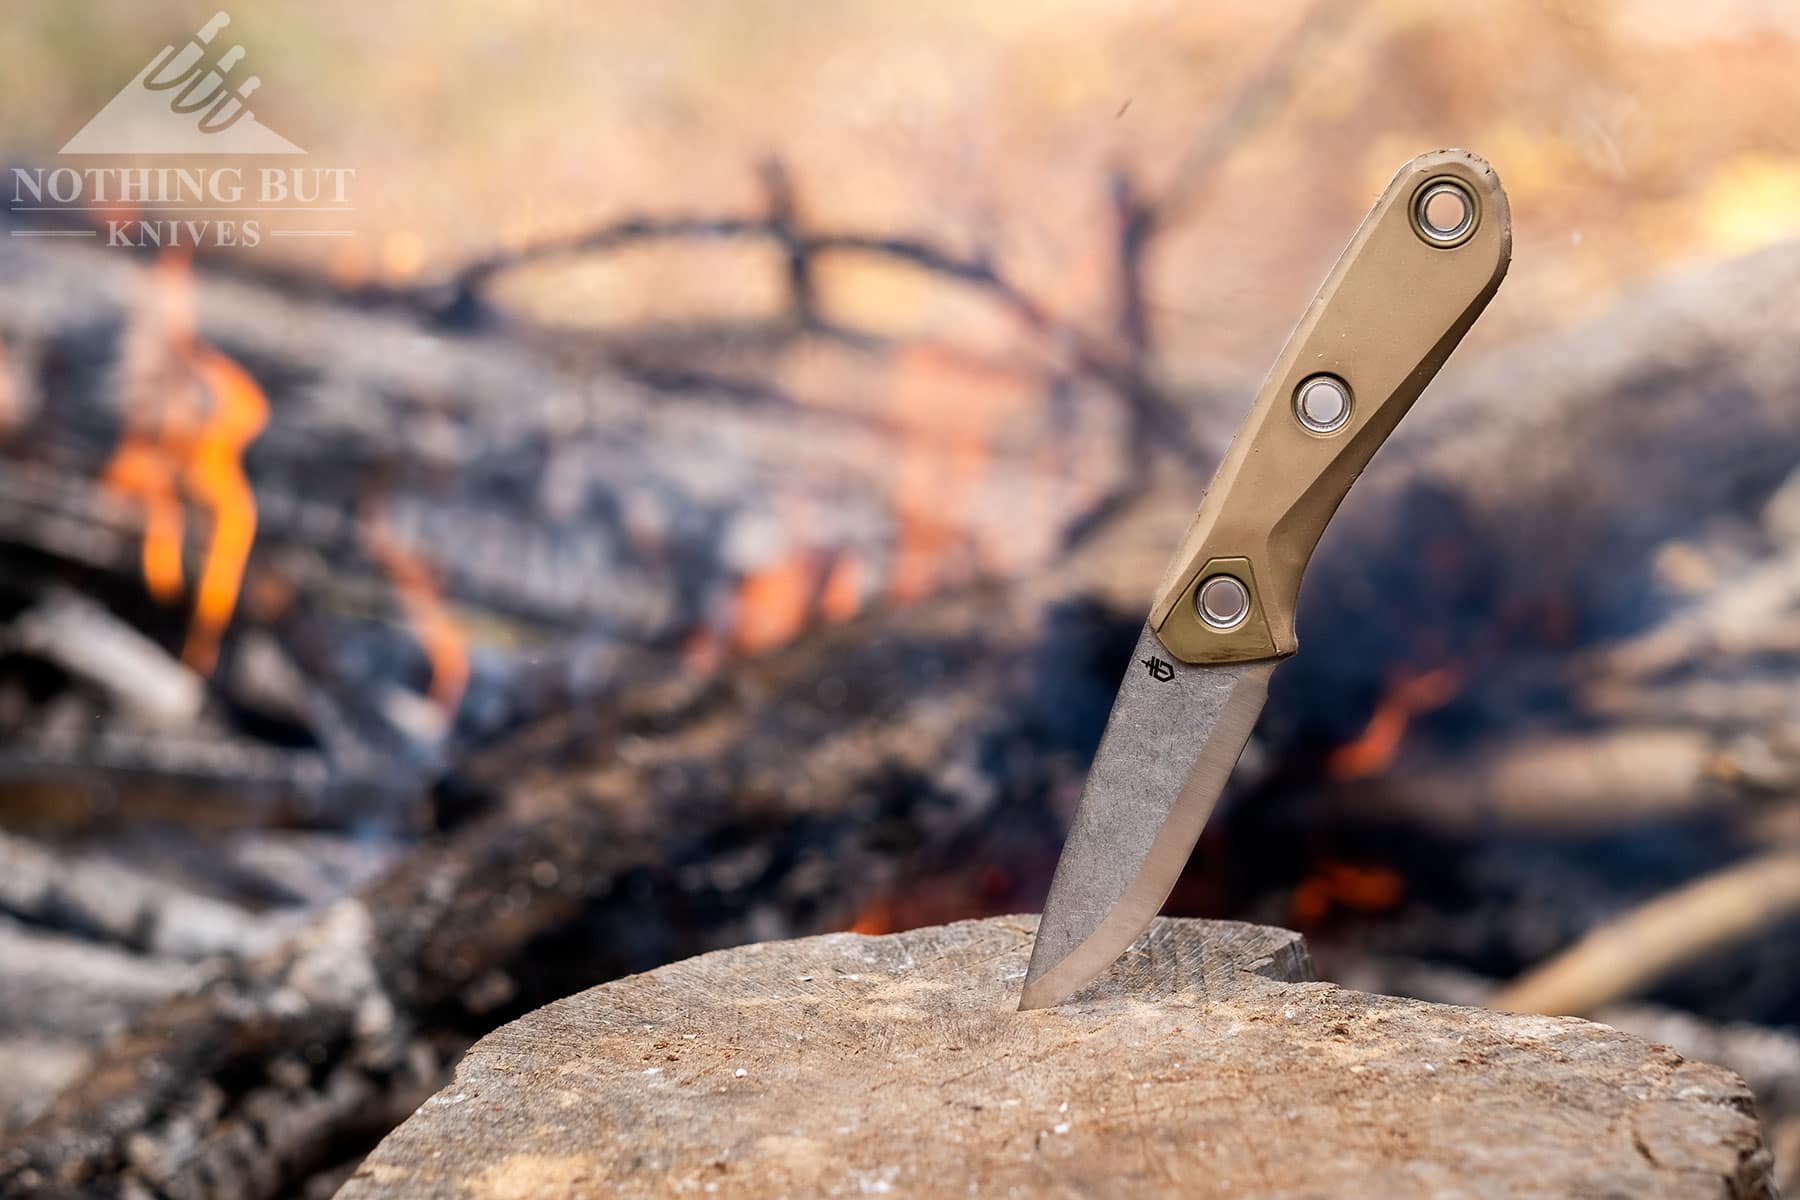 The Gerber Principle compact fixed blade knife sticking out of a tree stump in front of a campfire.